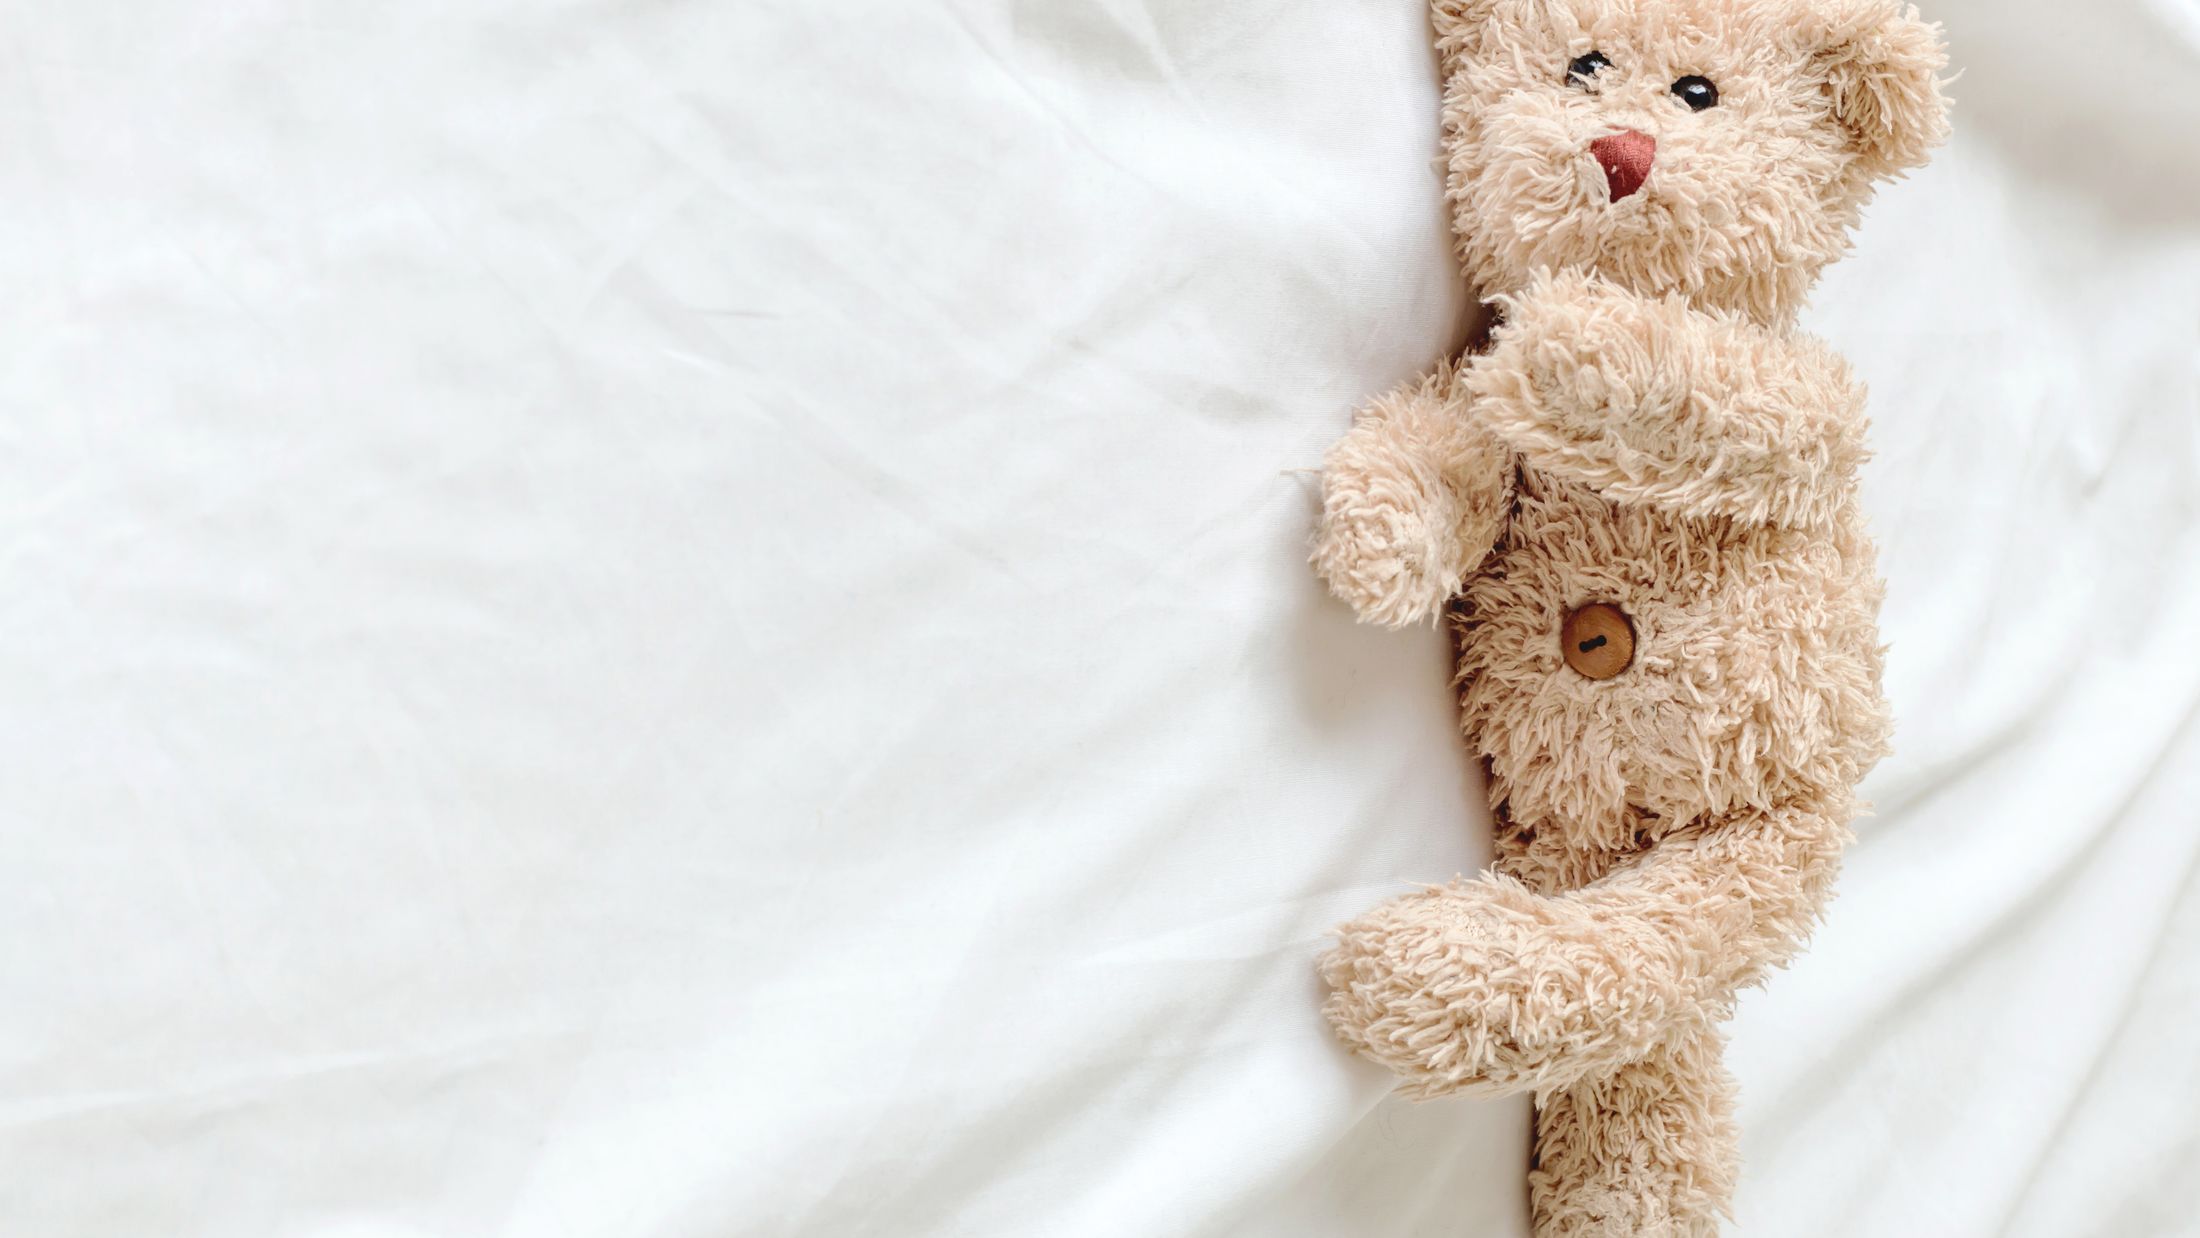 Teddy Bear lying in the bed / Teddy bear; Shutterstock ID 388693525; PO: Project Italy - Facilities images; Job: Project Italy - Facilities images; Client: H&J/Citalia